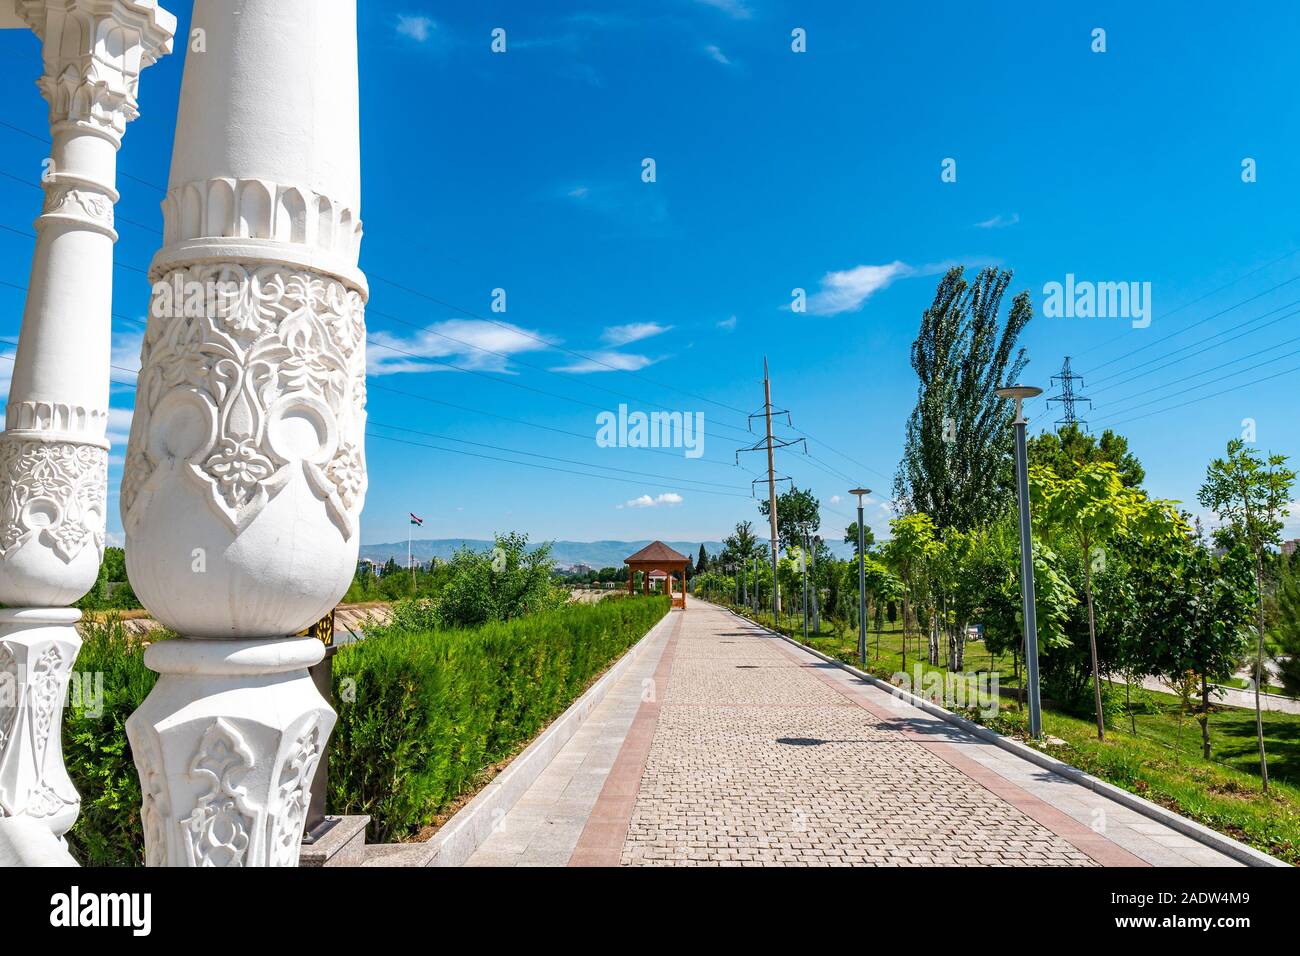 Dushanbe Youth Park Leading Lines View of Pavilion with Tajikistan Ornaments Decorated Columns on a Sunny Blue Sky Day Stock Photo